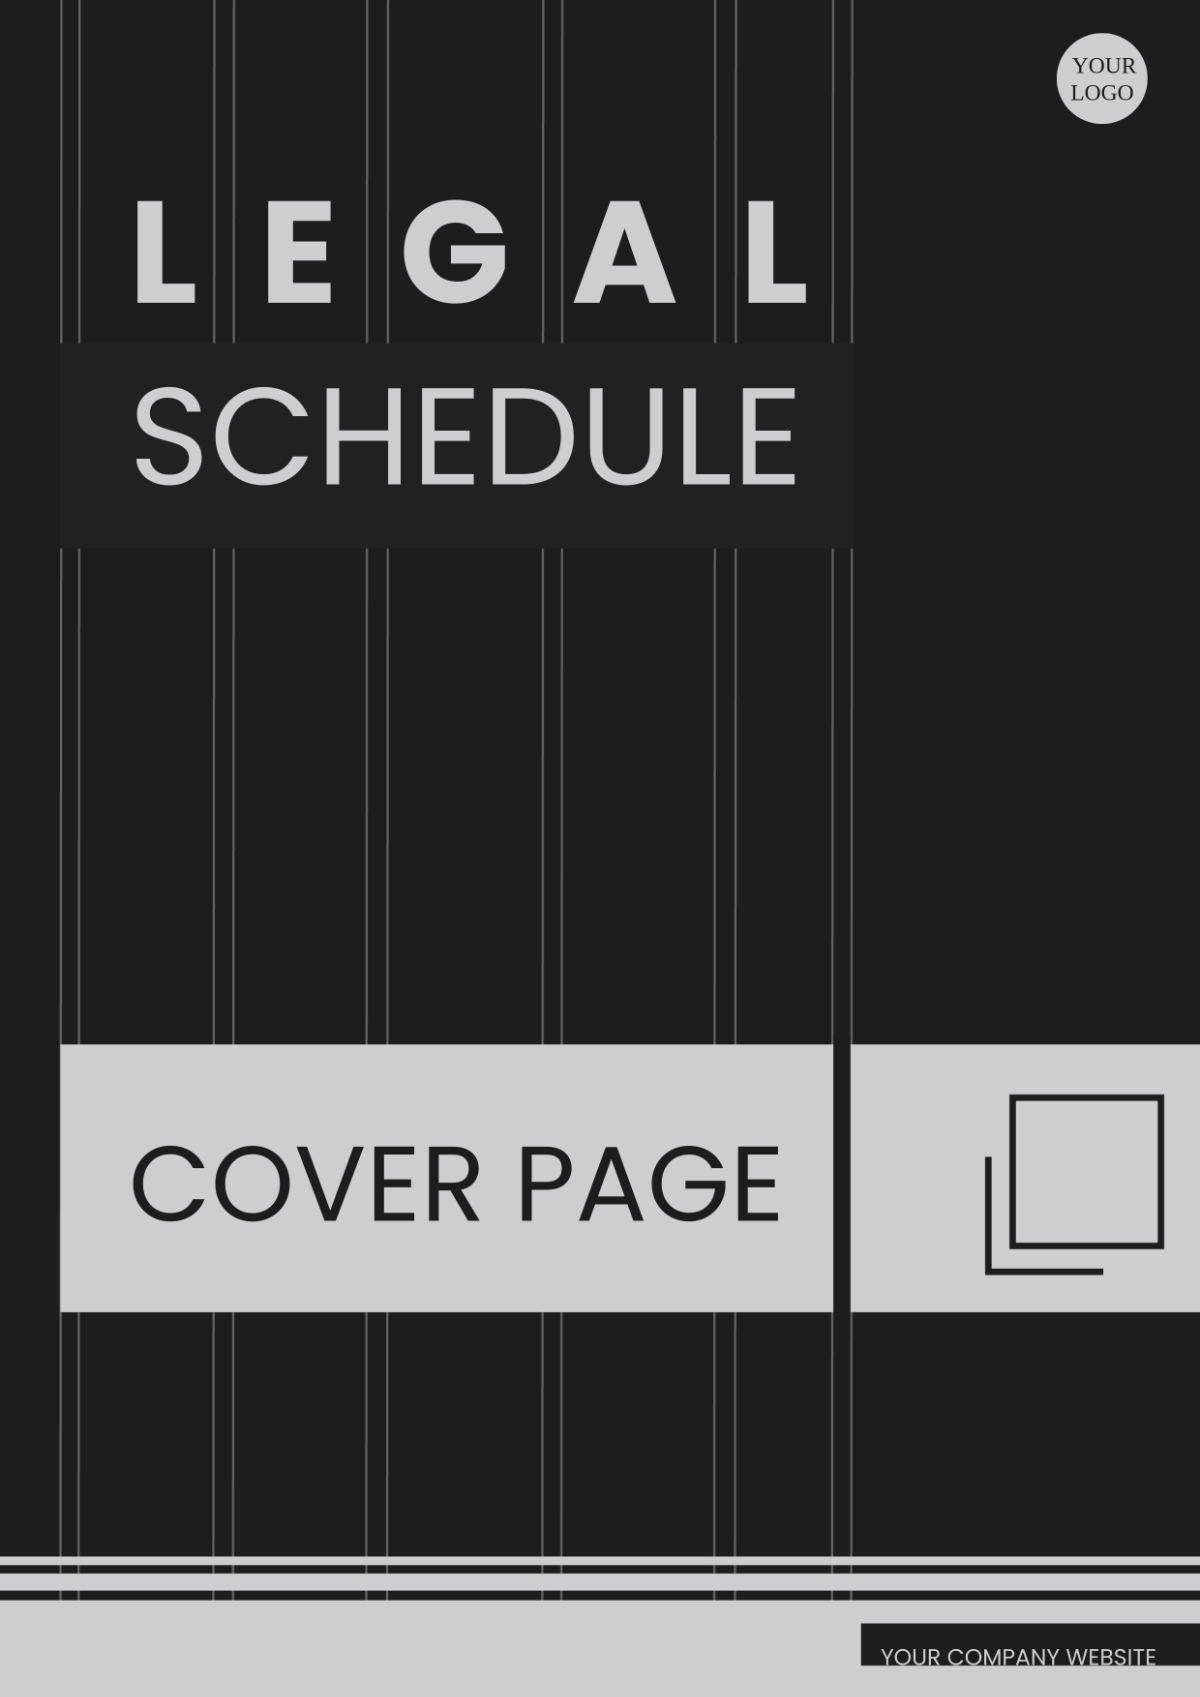 Legal Schedule Cover Page